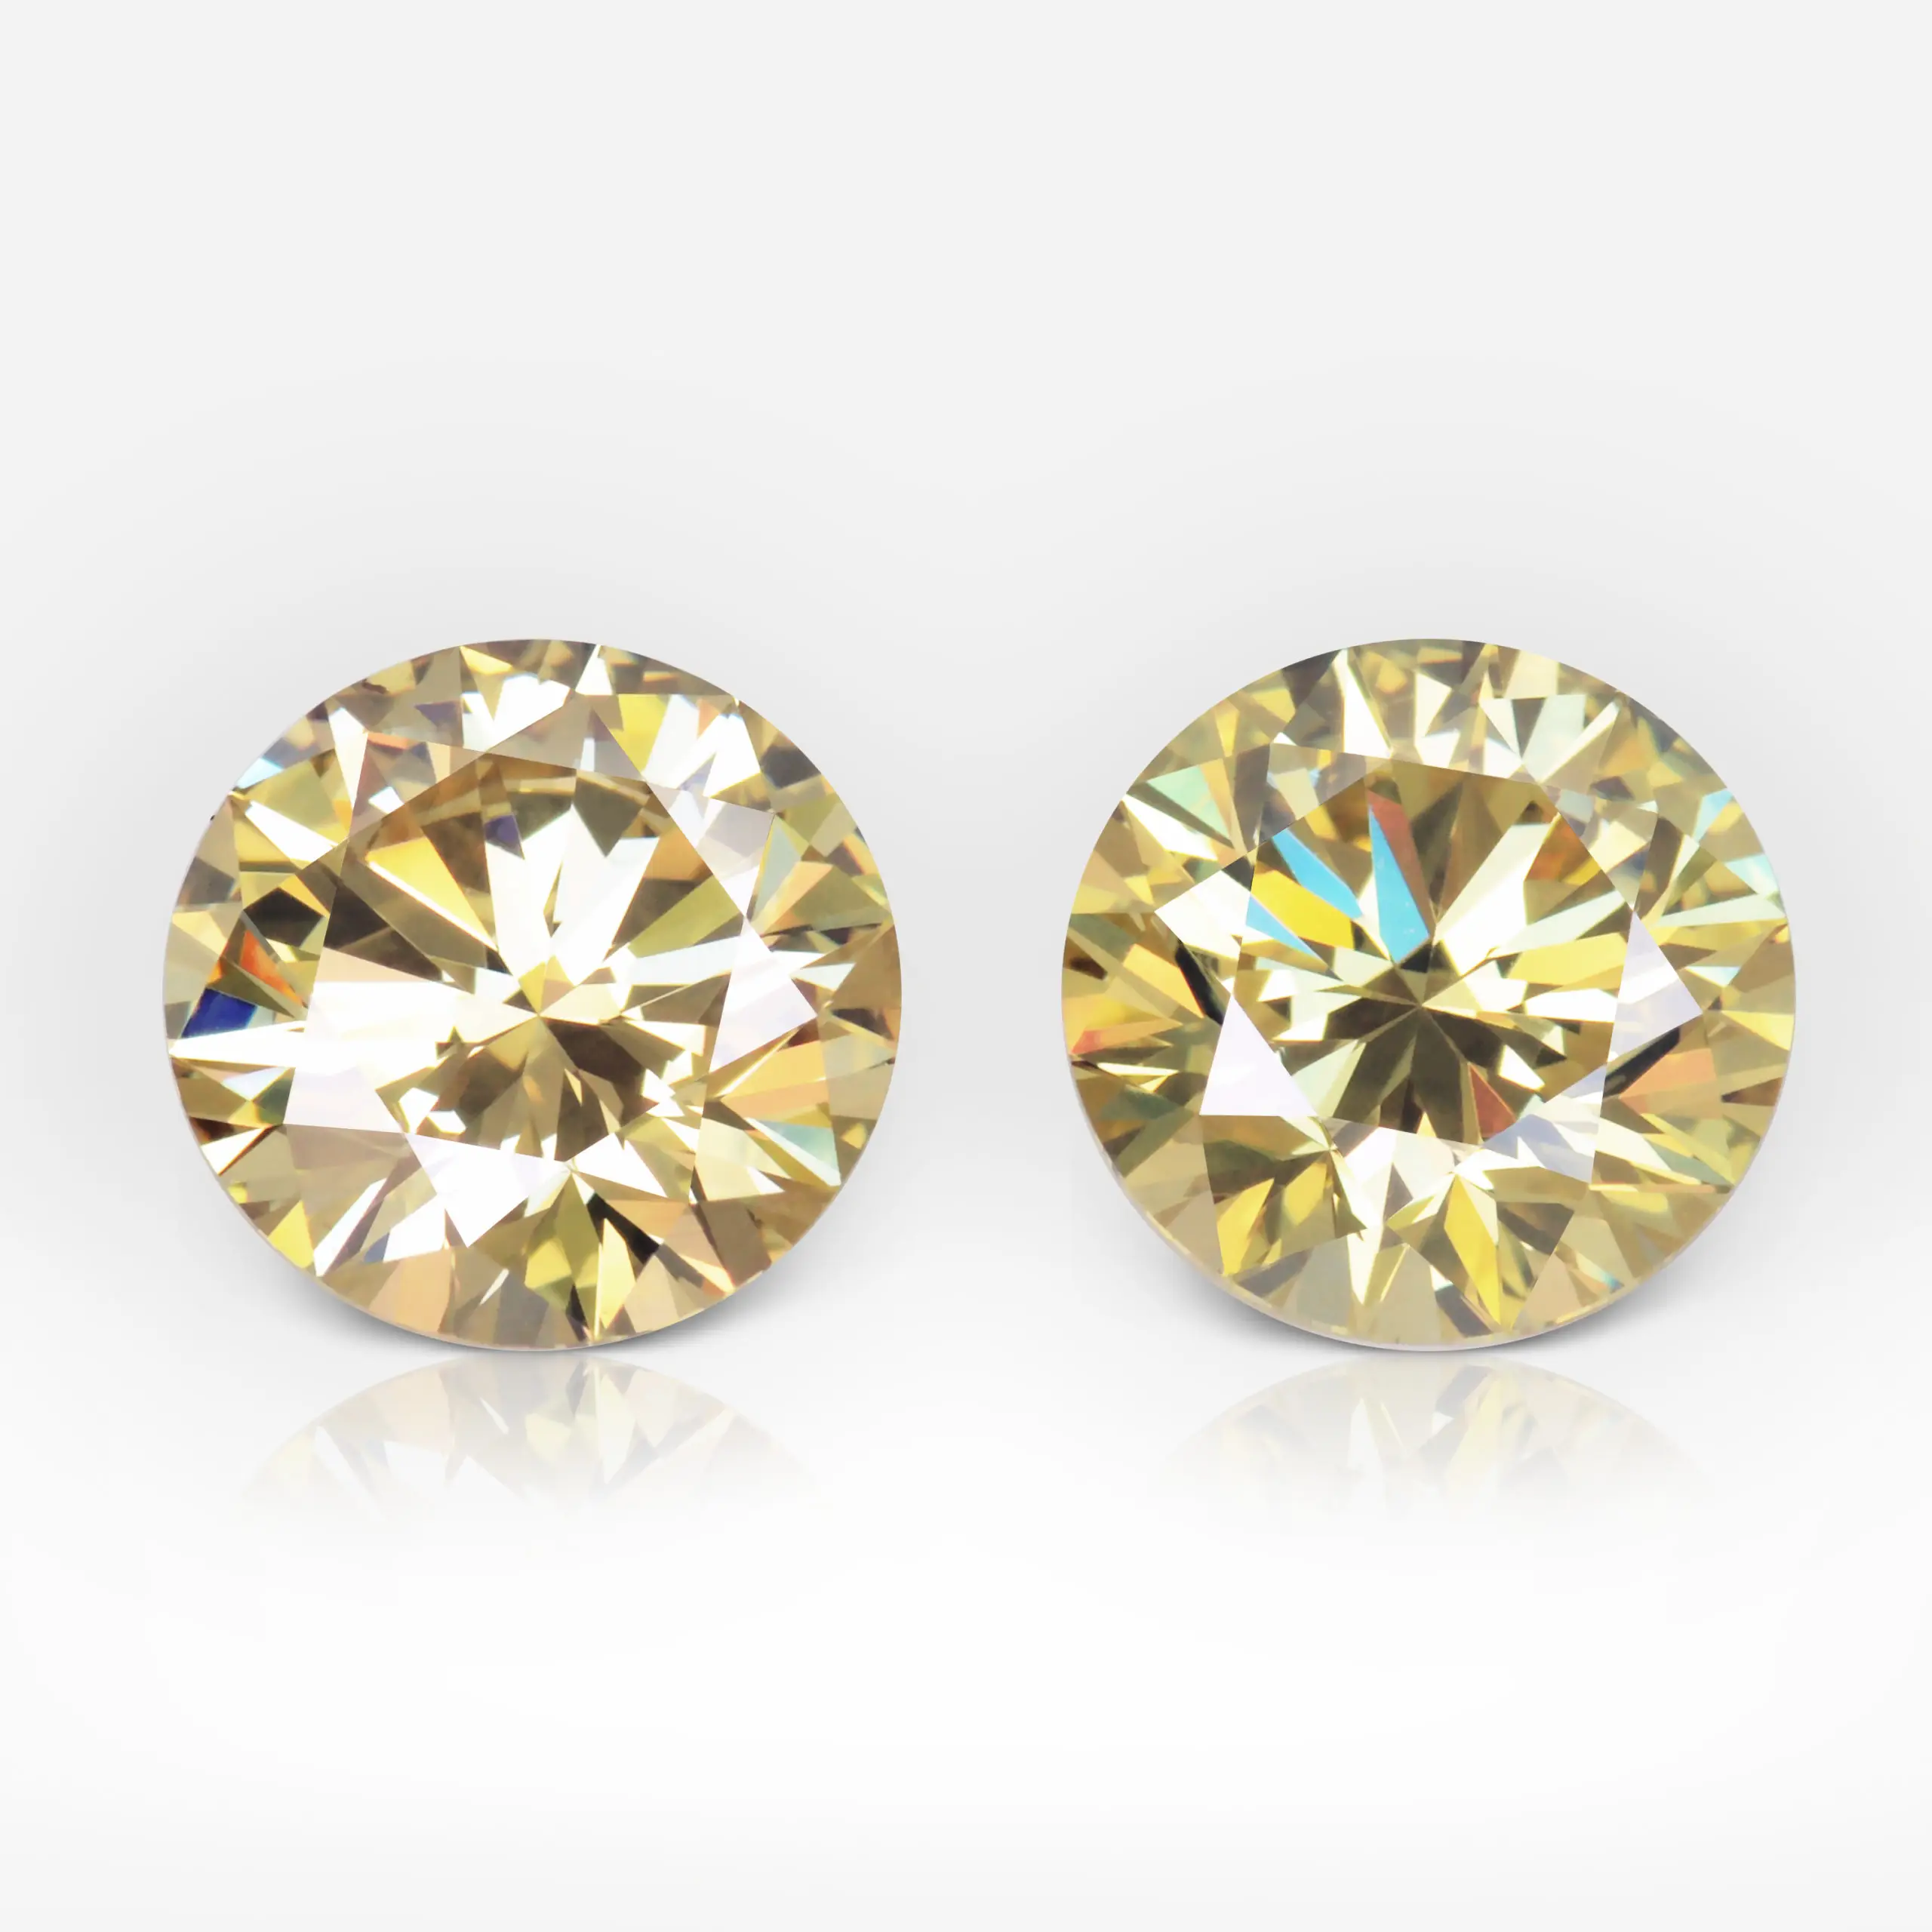 1.53 and 1.58 carat Pair of Fancy Intense Yellow VS2 Round Shape Diamonds GIA - picture 1